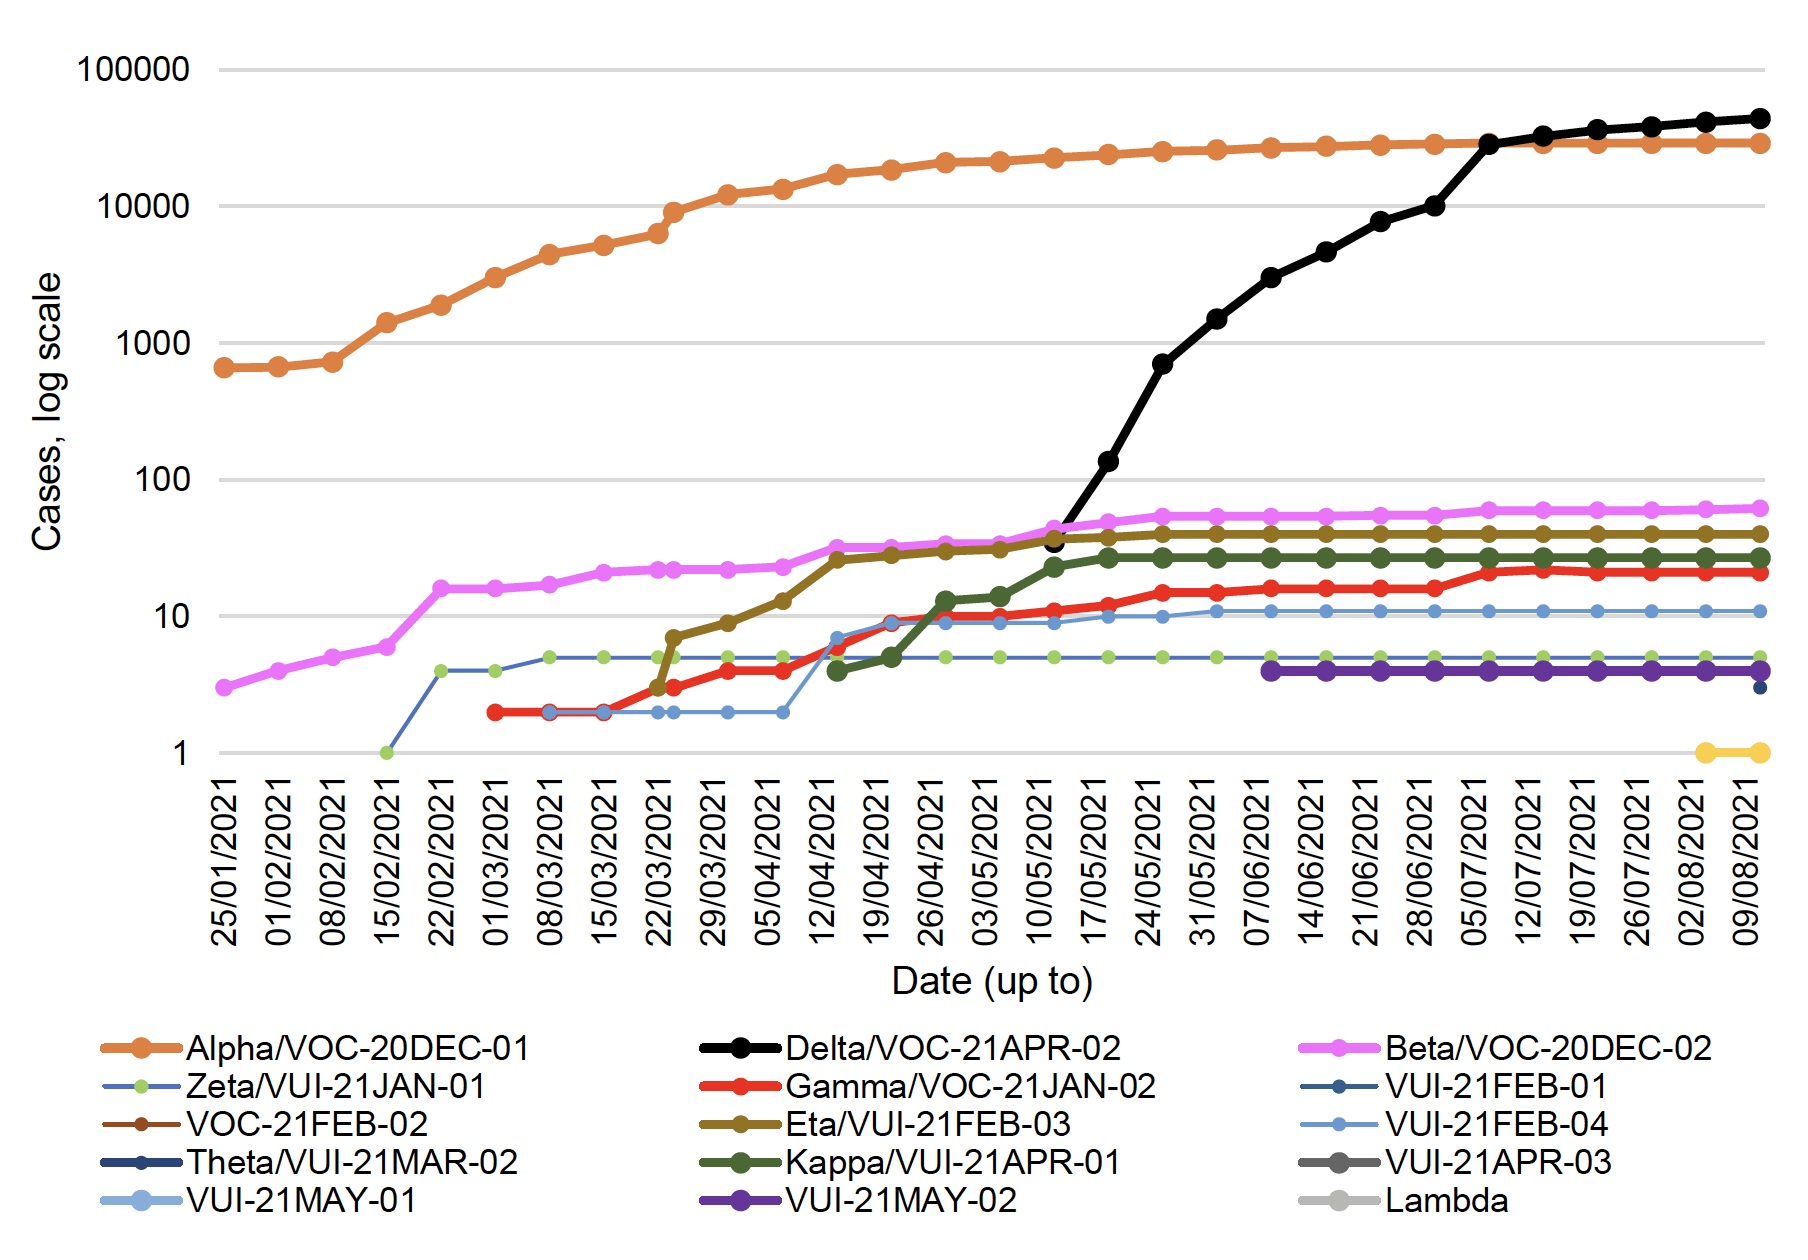 This line graph shows the number of cases of the variants of concern and variants of interest that have been detected by sequencing in Scotland each week, from the 25th of January to the 11th August 2021.
Beta, also known as VOC-20DEC-02, first detected in South Africa, was increasing steadily since late January from 3 cases to 60 cases on the 7th July, and then increased to 62 cases by 11 August. Eta, or VUI-21FEB-03, first identified in Nigeria, rapidly increased since mid-March and reached 40 cases at the end of May. Eta has remained stable over the last eleven weeks. Gamma remained at 21 cases in the week to 11th August. There are also 27 cases of Kappa, or VUI-21APR-01, first identified in India, no change since the week before. The first case of VUI-21Jul-01 emerged in the week to 4th August butno further cases were identified in the week to 11th August. Delta, also known as VOC-21APR-02, first identified in India, has seen a rapid increase in the past twelve weeks to 44,254 cases, an increase of 2,753 cases since the week before.
